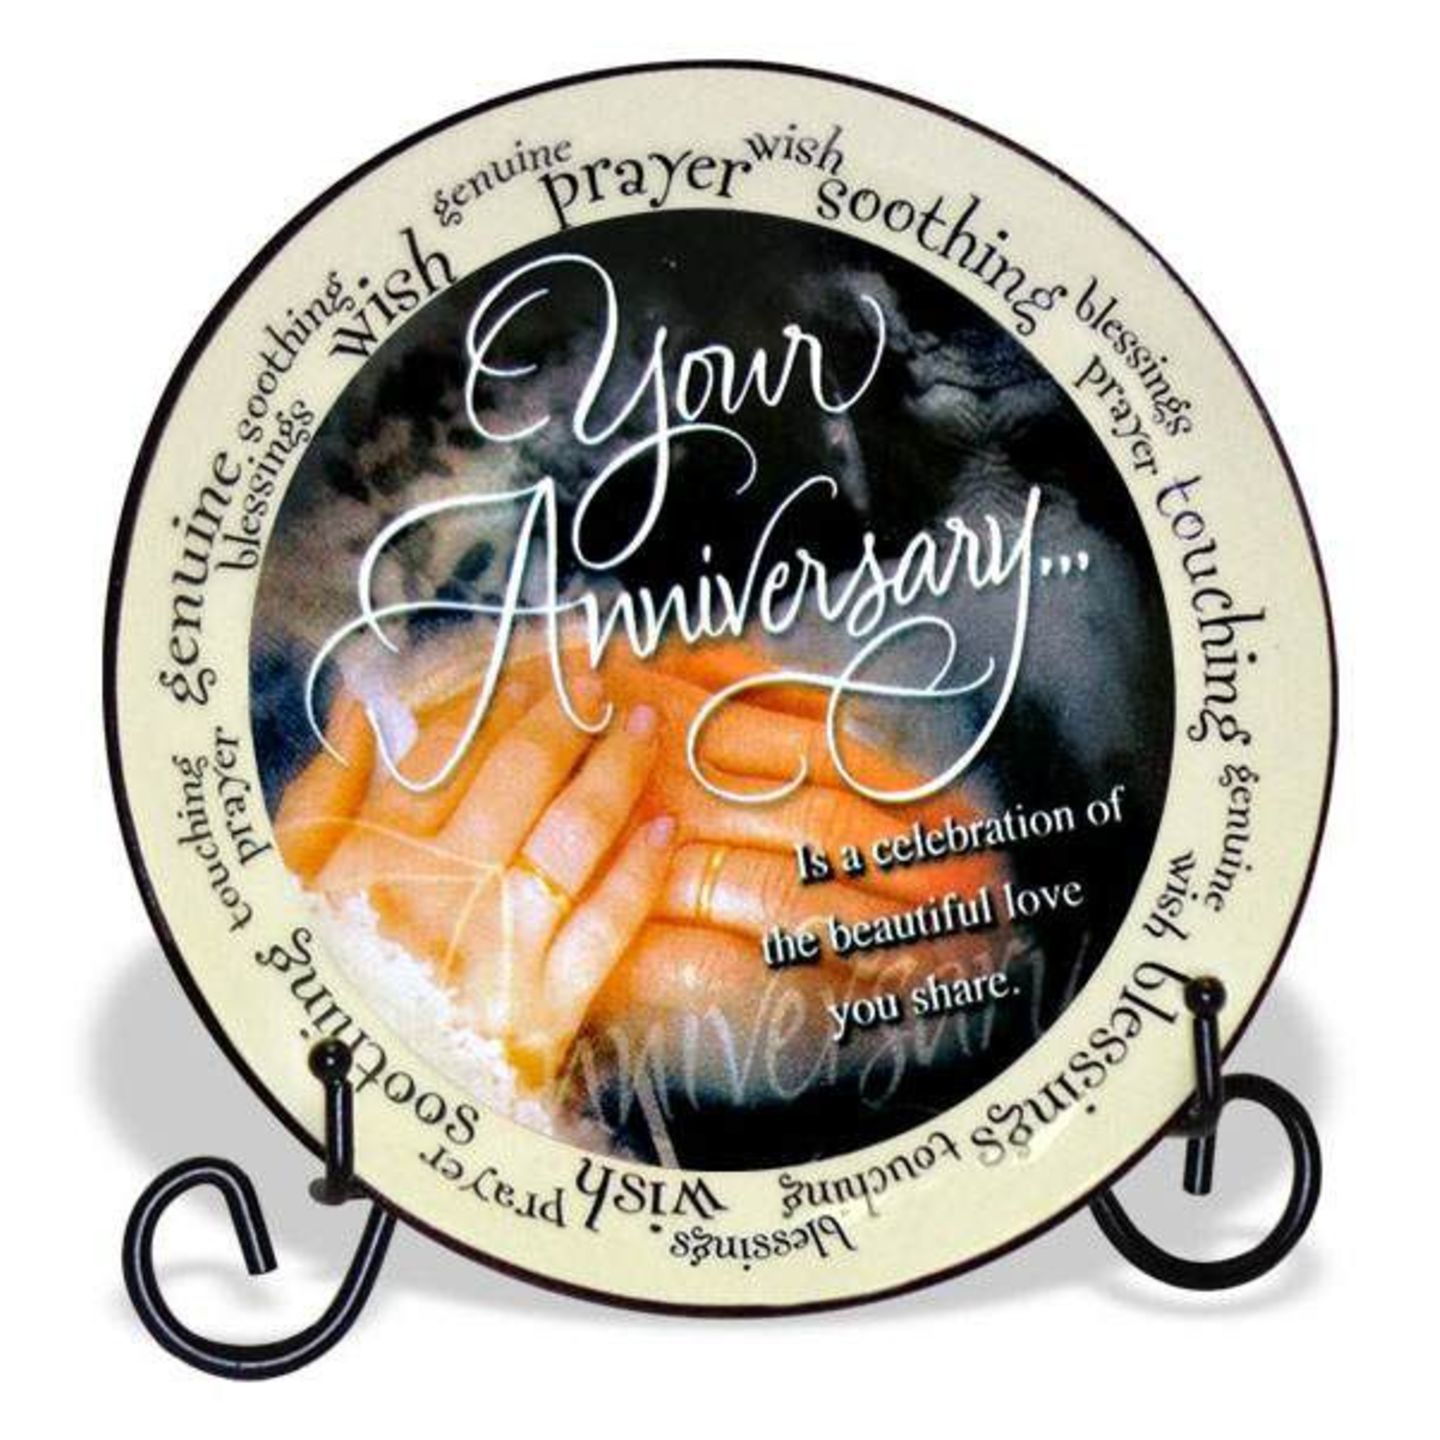 Archies Anniversary Quotation Decorative Plate 